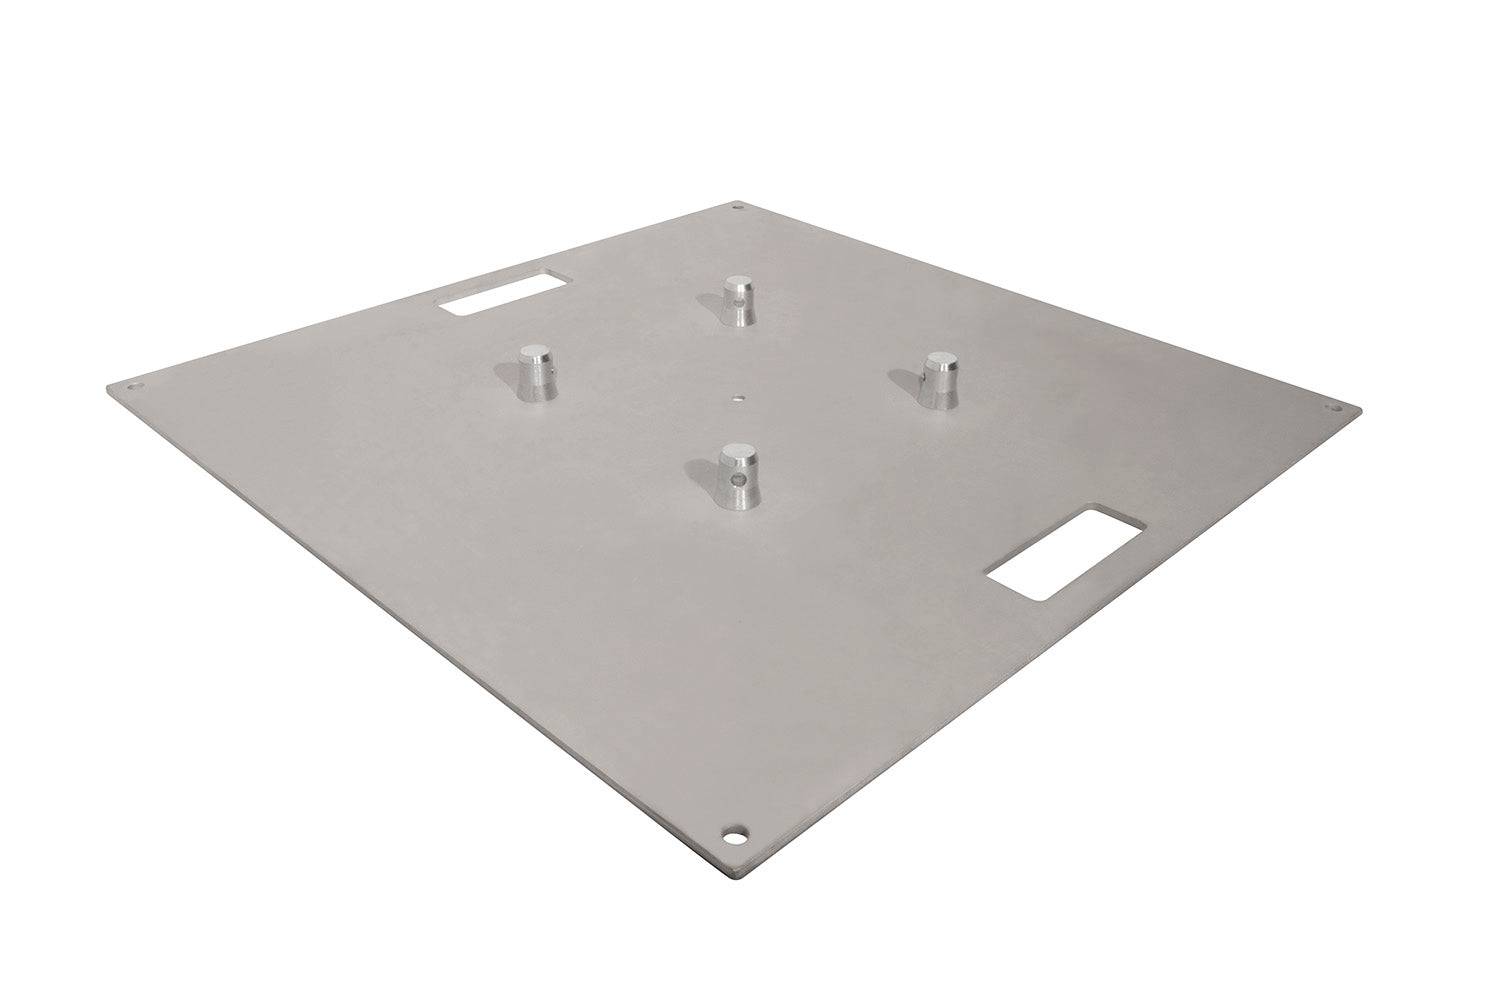 Chauvet Trusst CT290-4130B, 30 Inches Base Plate for Truss Totems - Hollywood DJ